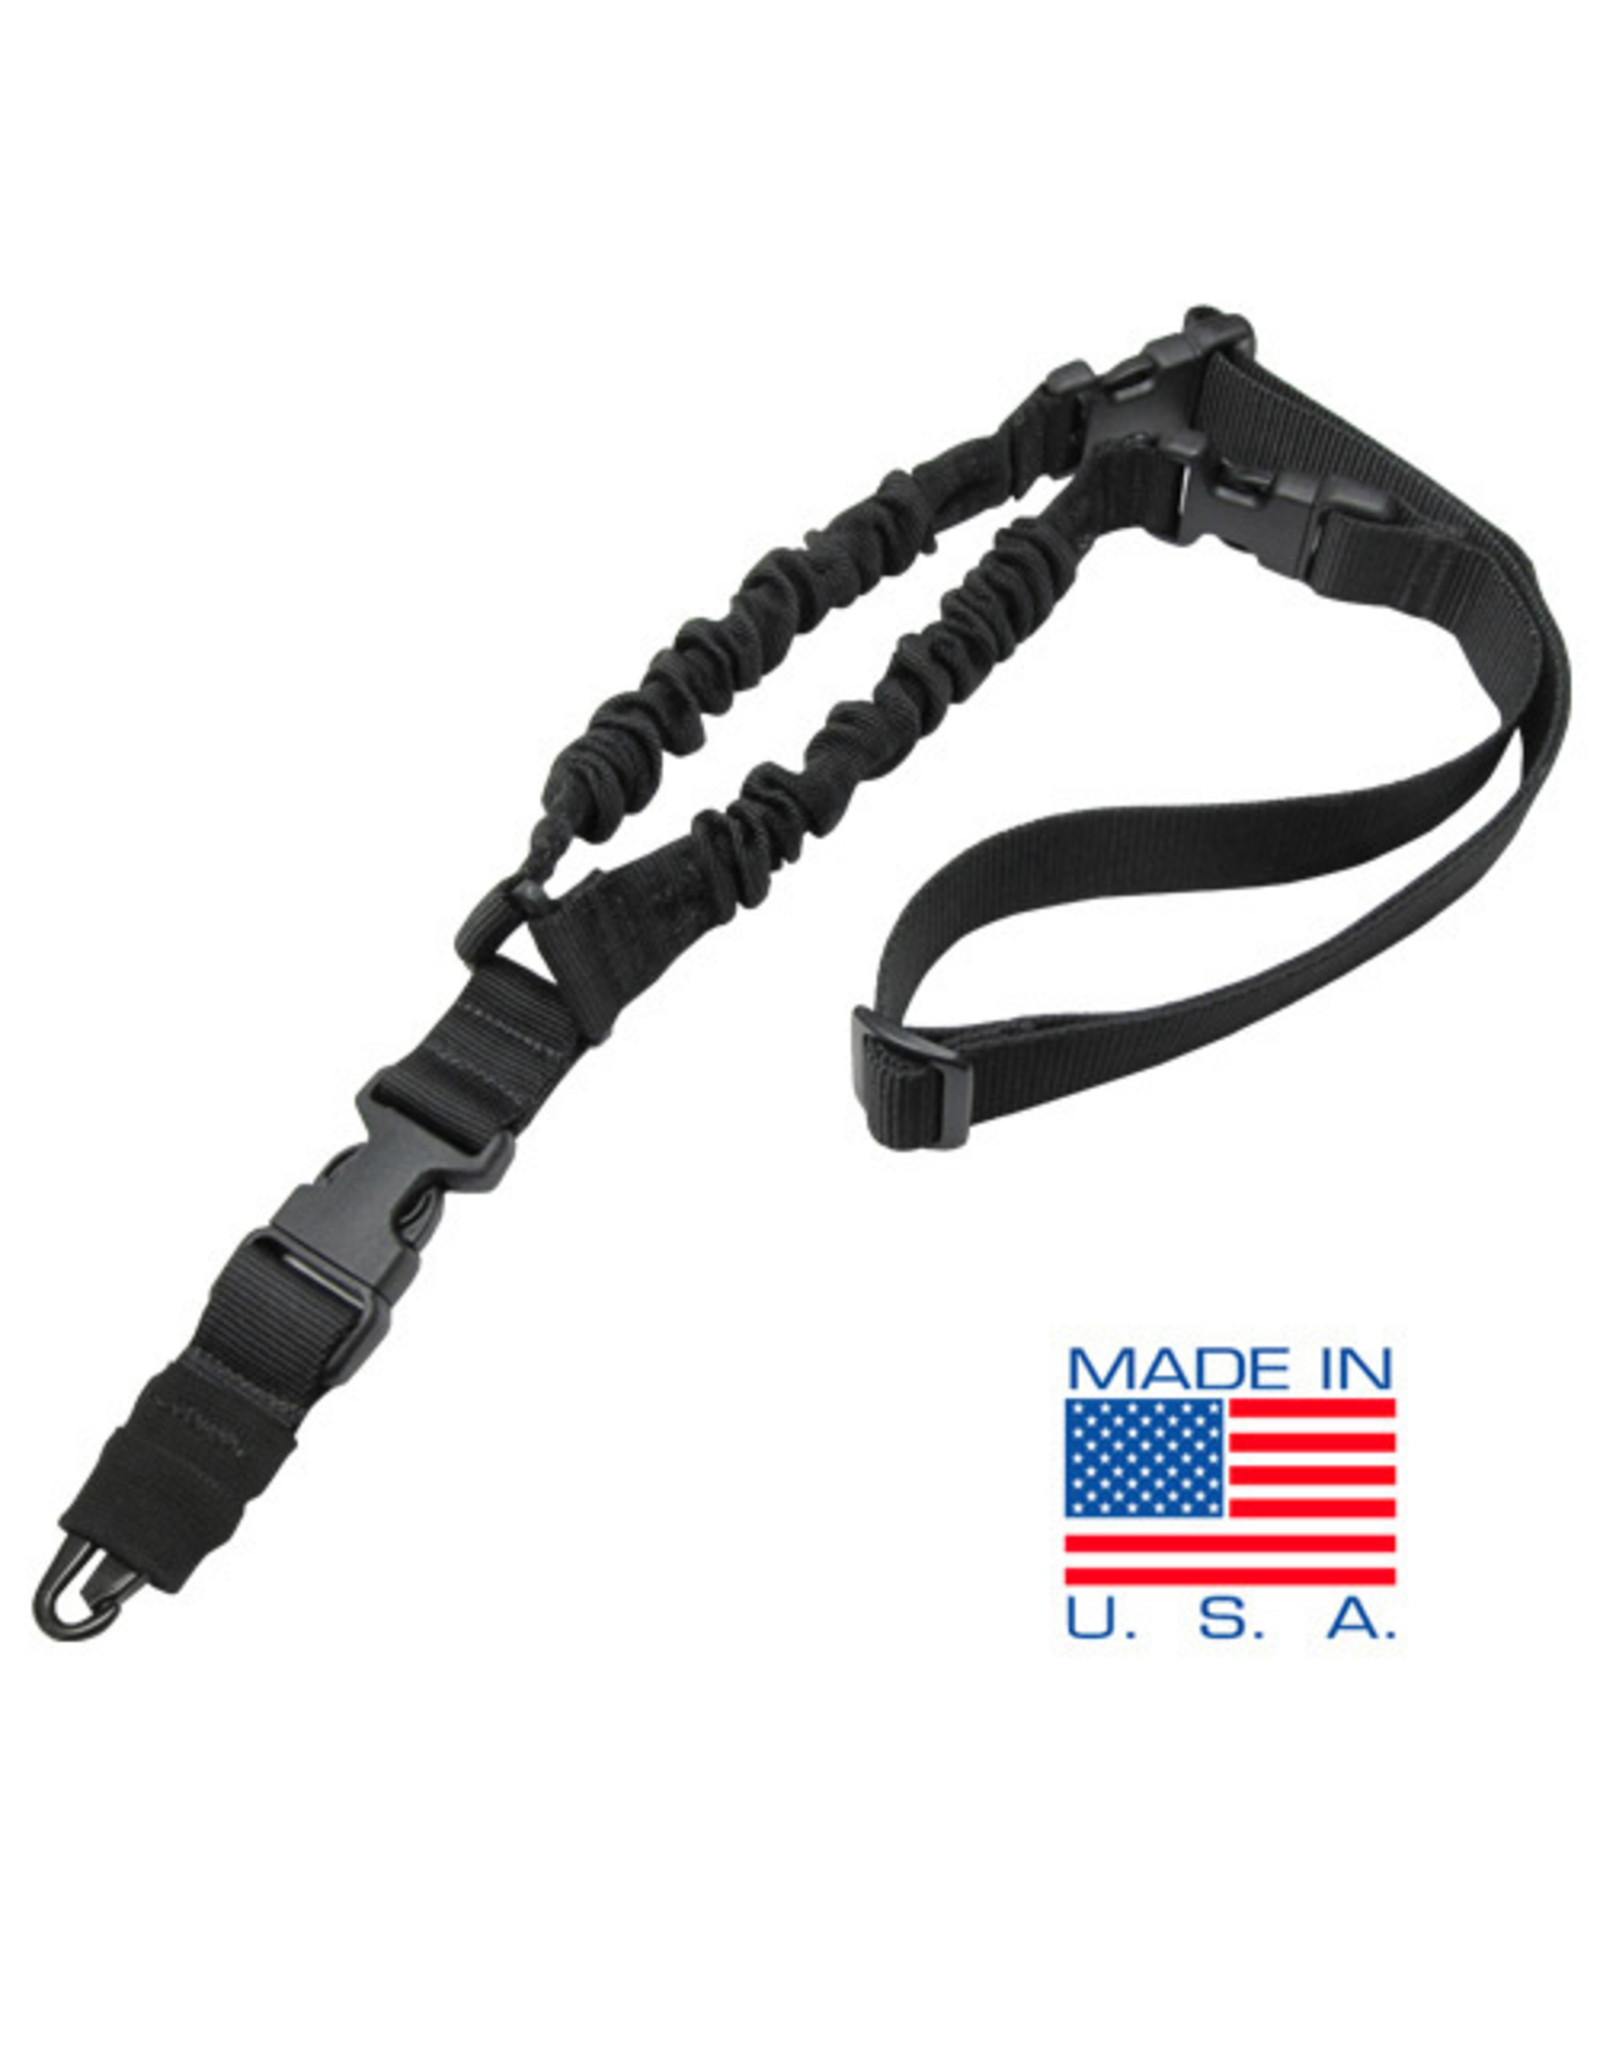 CONDOR TACTICAL COBRA ONE POINT BUNGEE SLING, BLACK